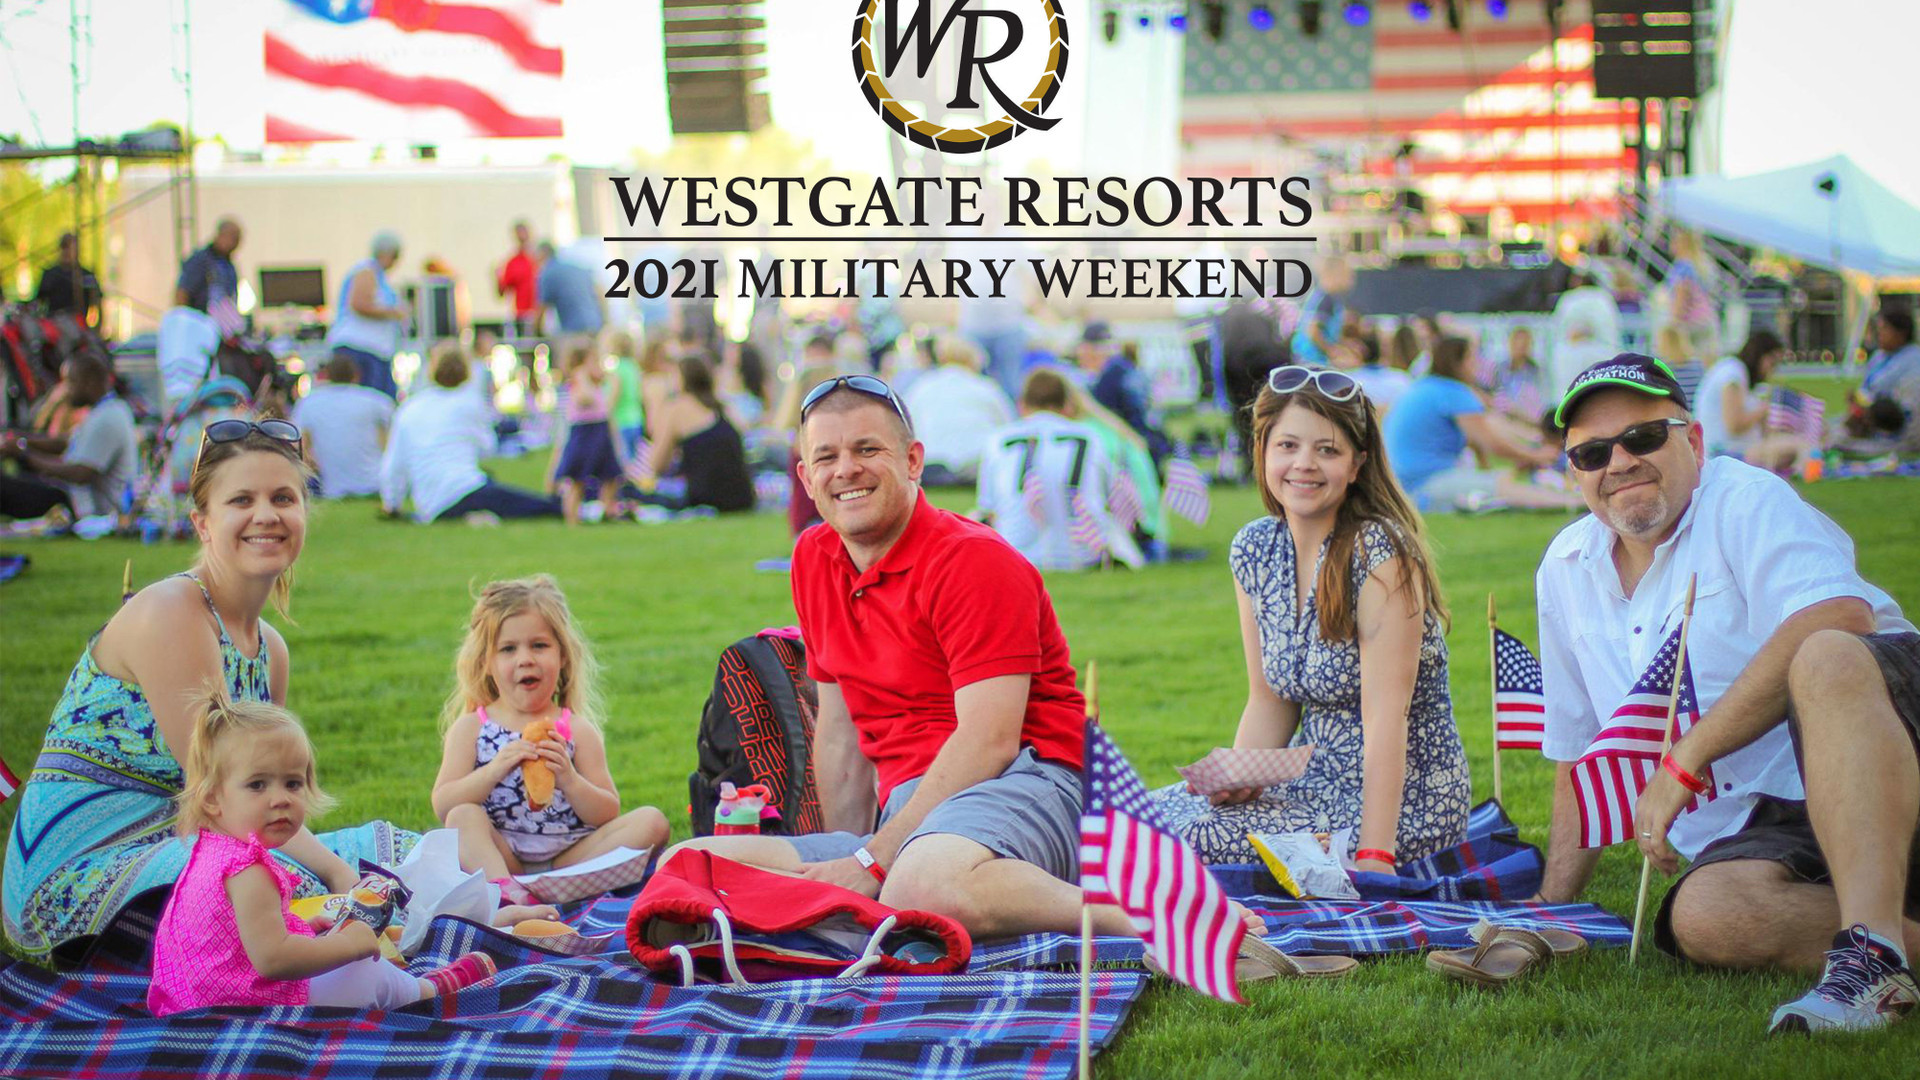 Westgate Resorts to Give Away 900 Free Vacations to U.S Military Families